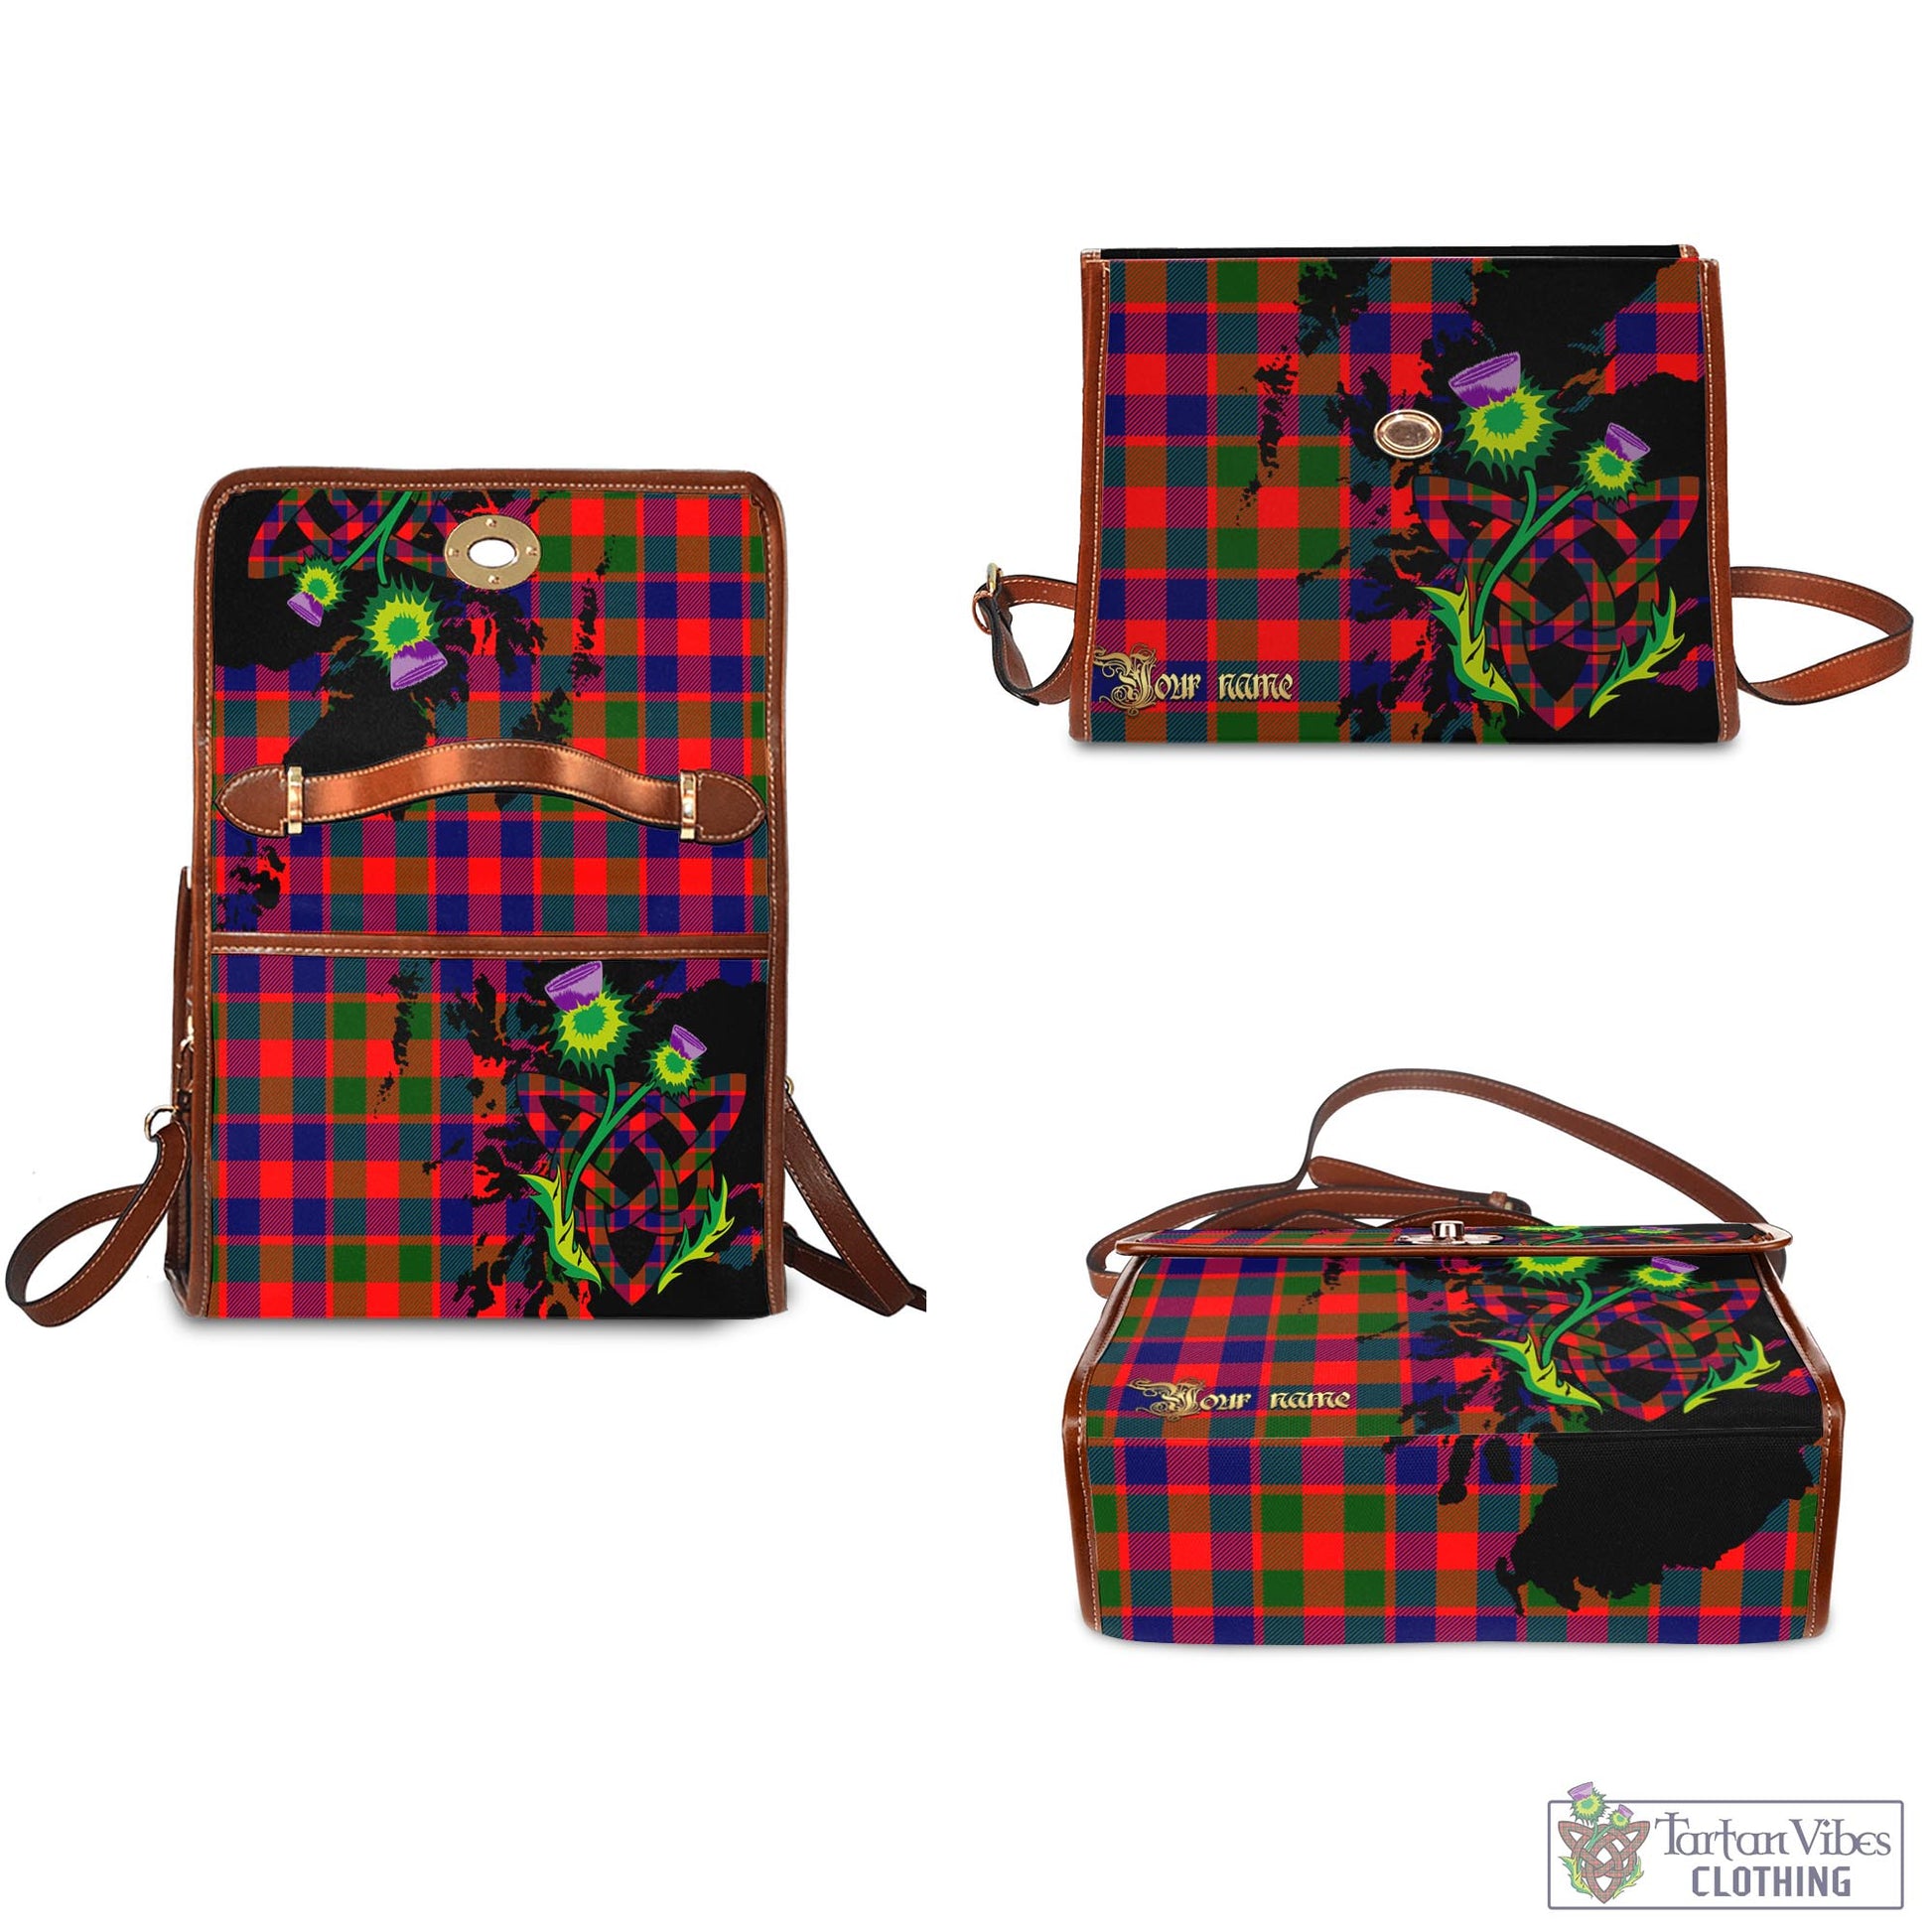 Tartan Vibes Clothing Gow of Skeoch Tartan Waterproof Canvas Bag with Scotland Map and Thistle Celtic Accents